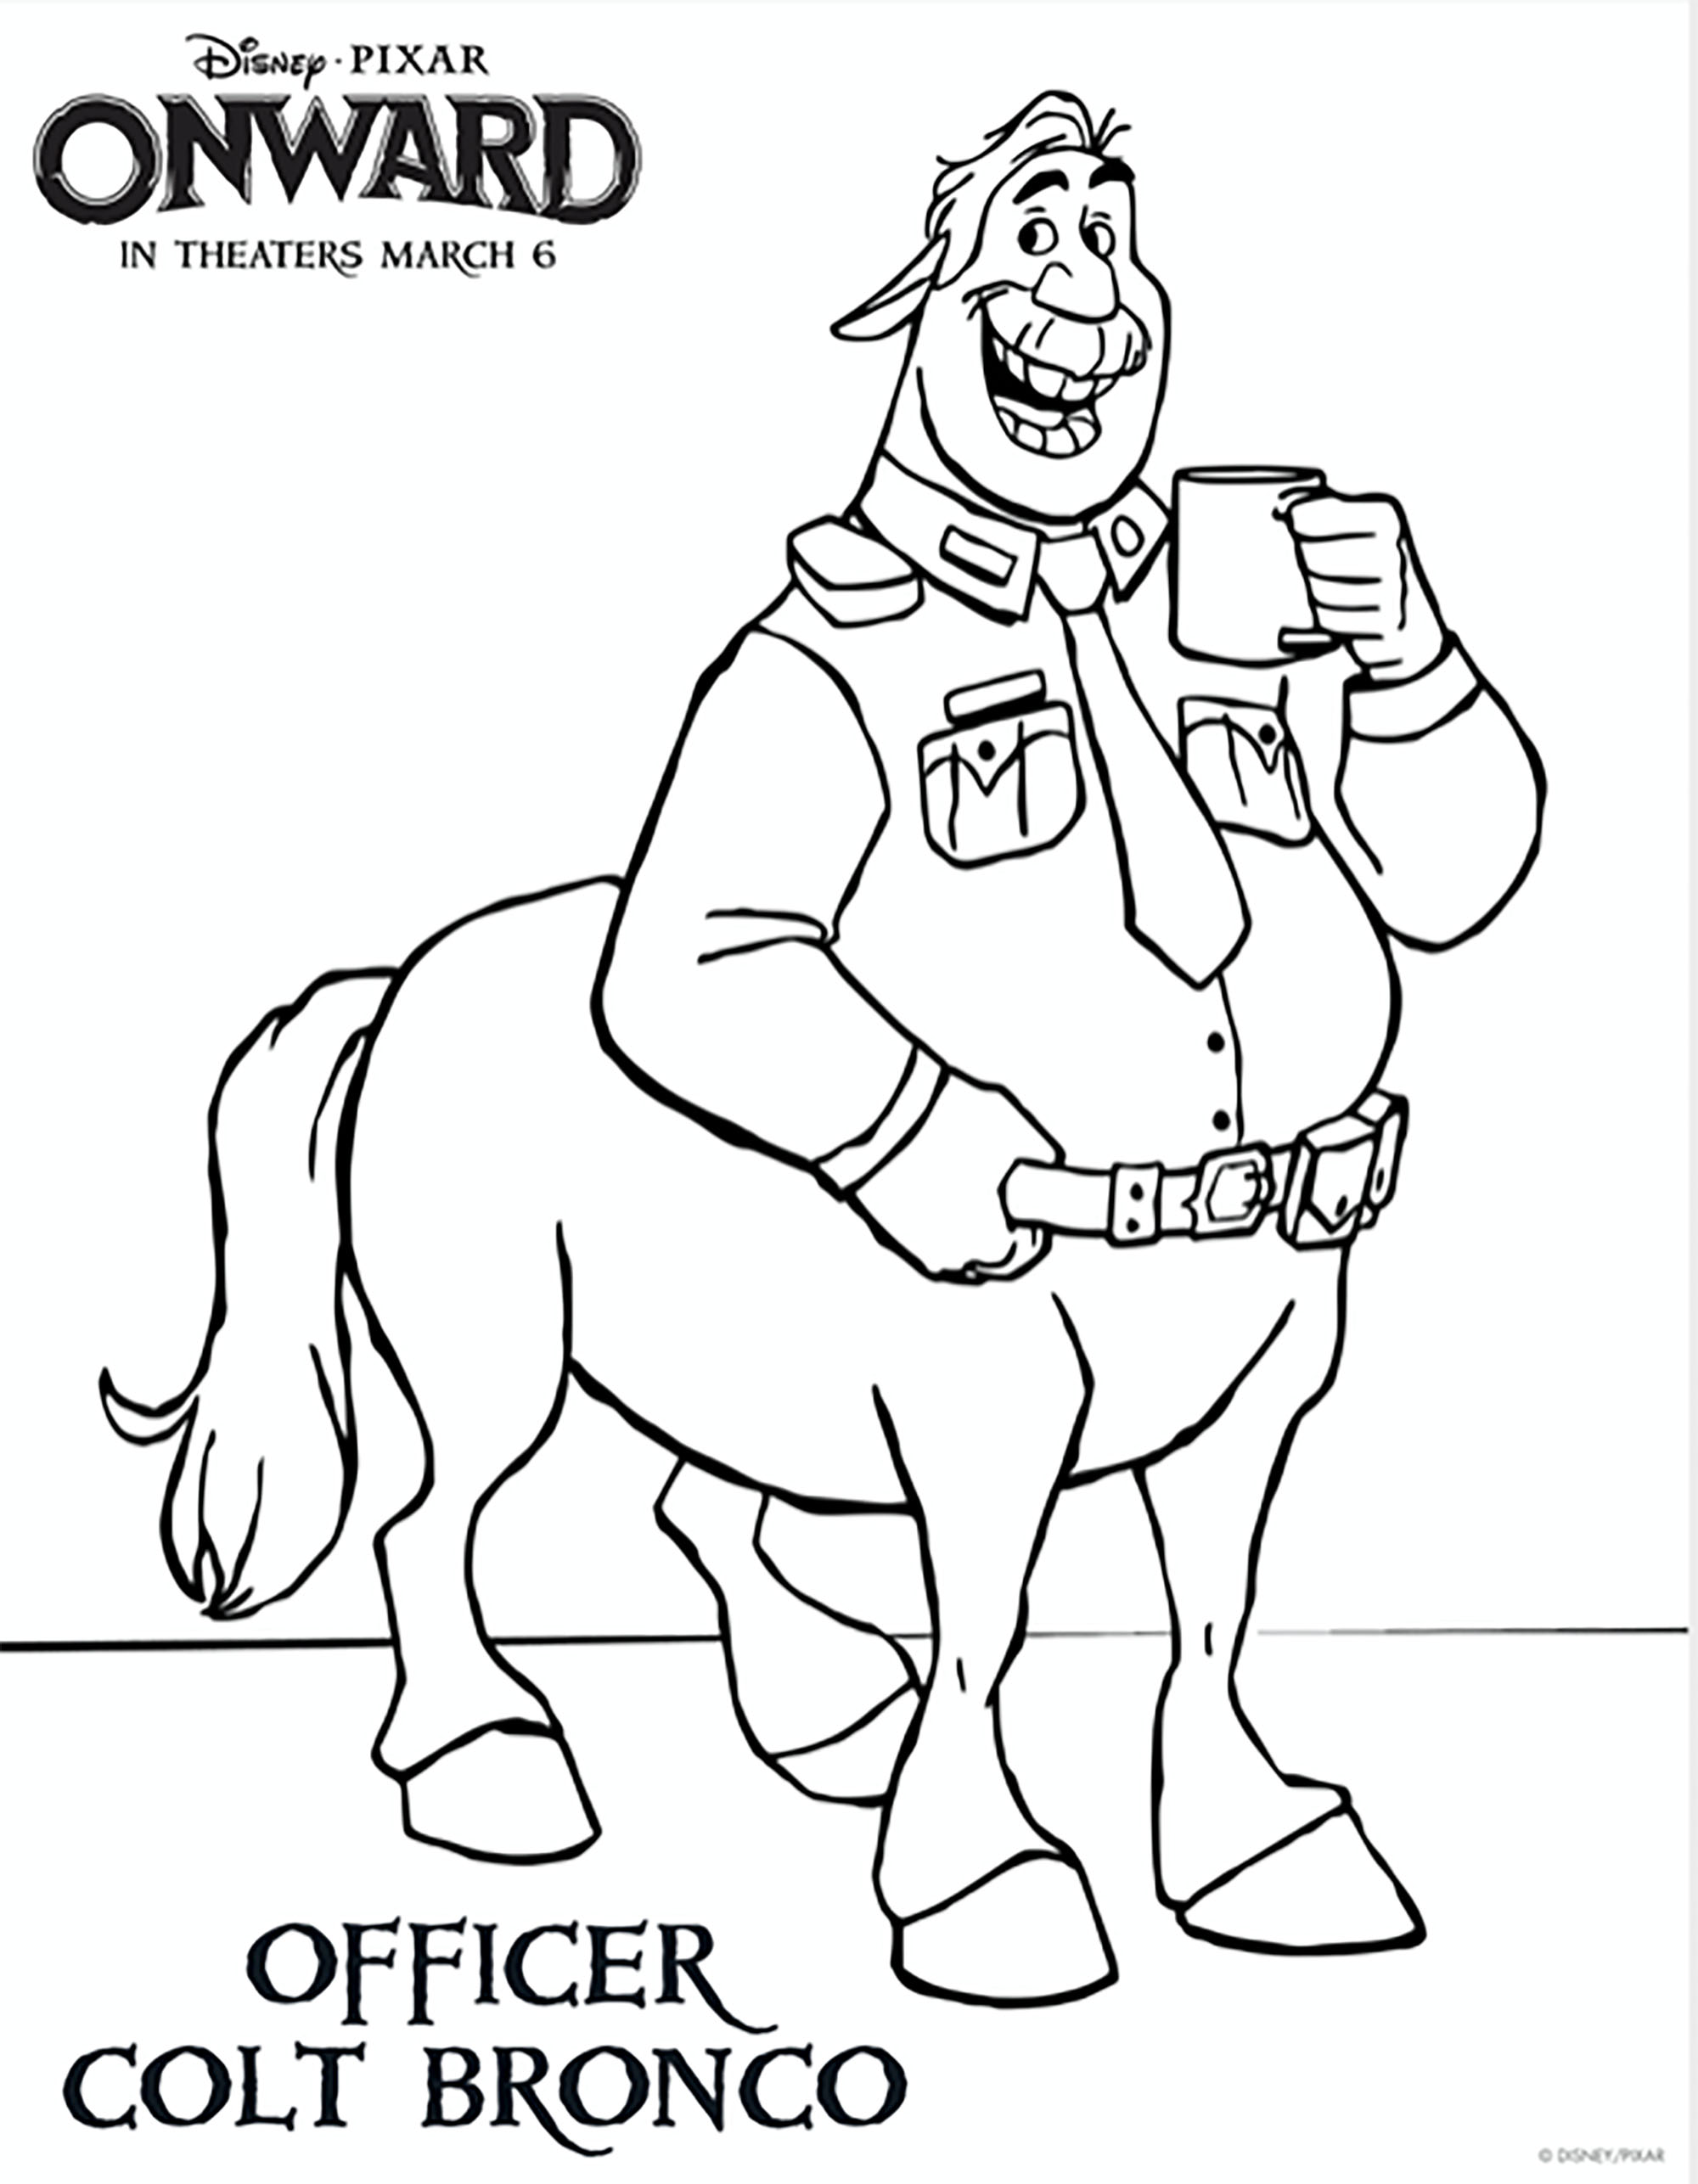 Printable coloring pages of Forward for kids